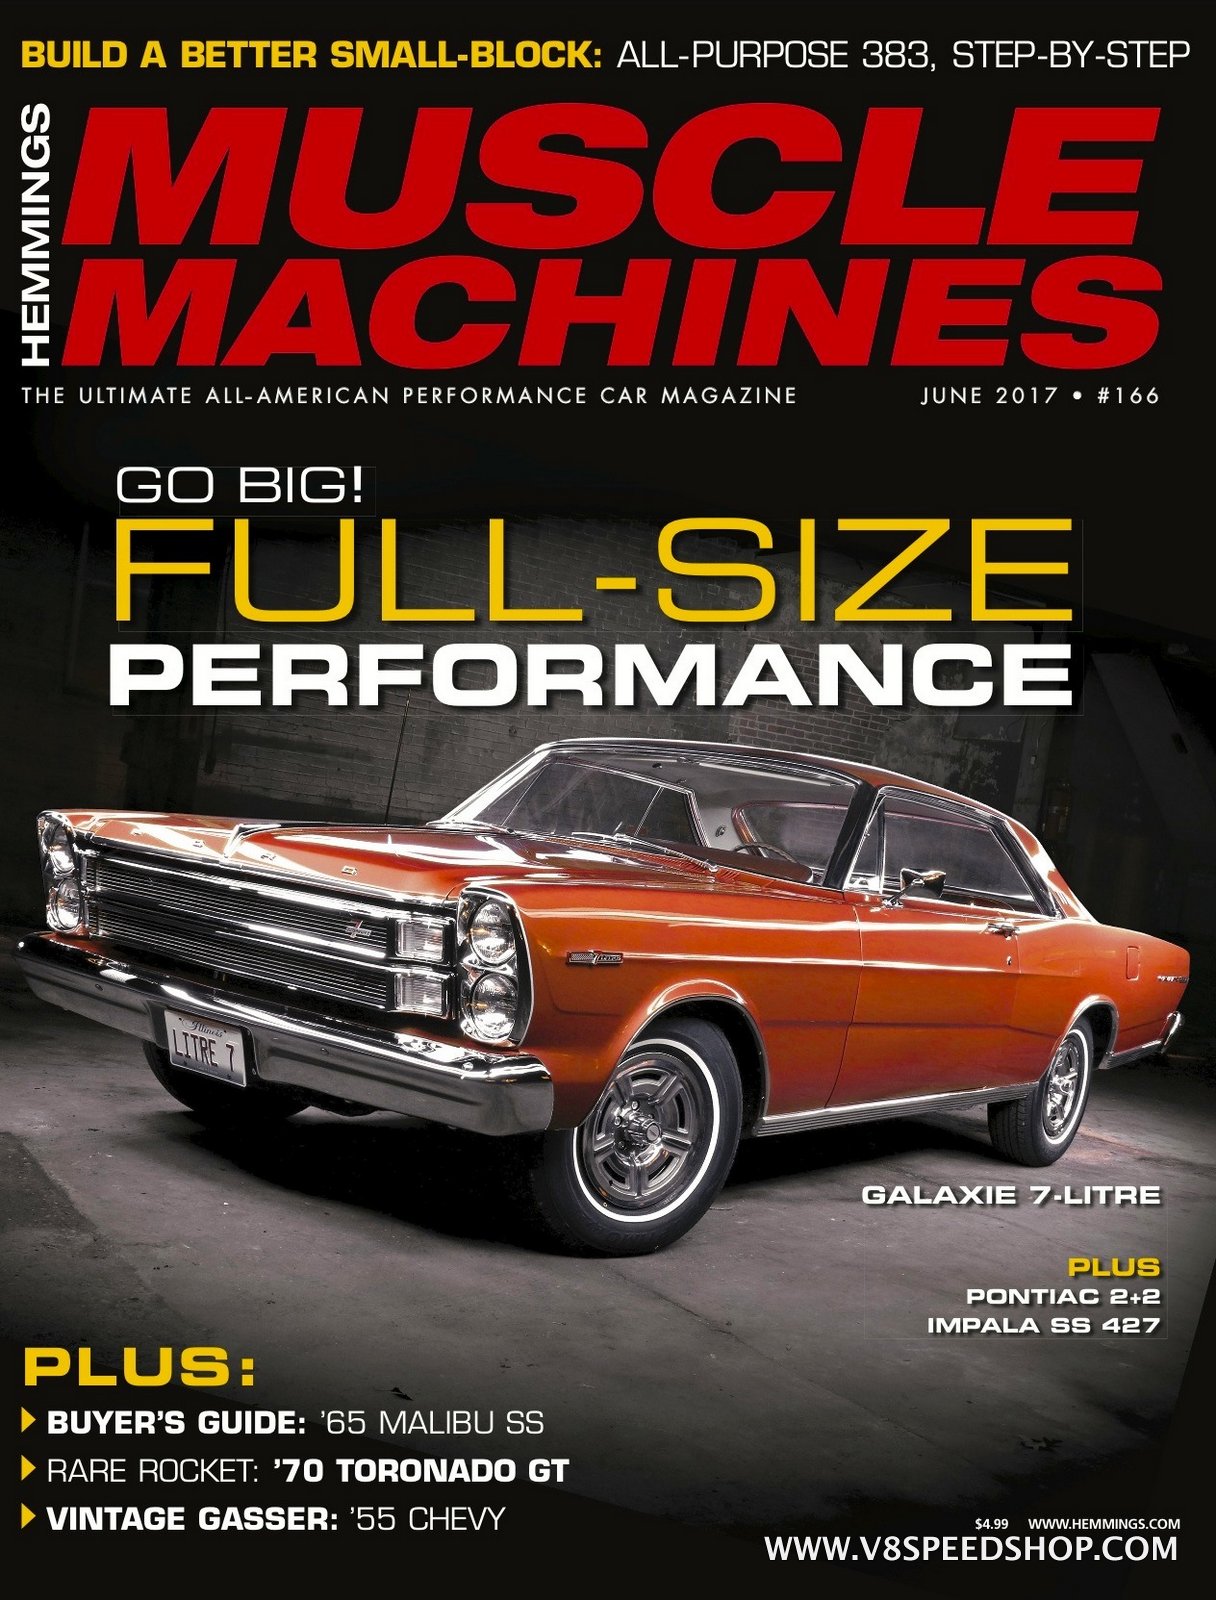 1966 Ford Galaxie 500 7-Litre Restoration at V8 Speed and Resto Shop